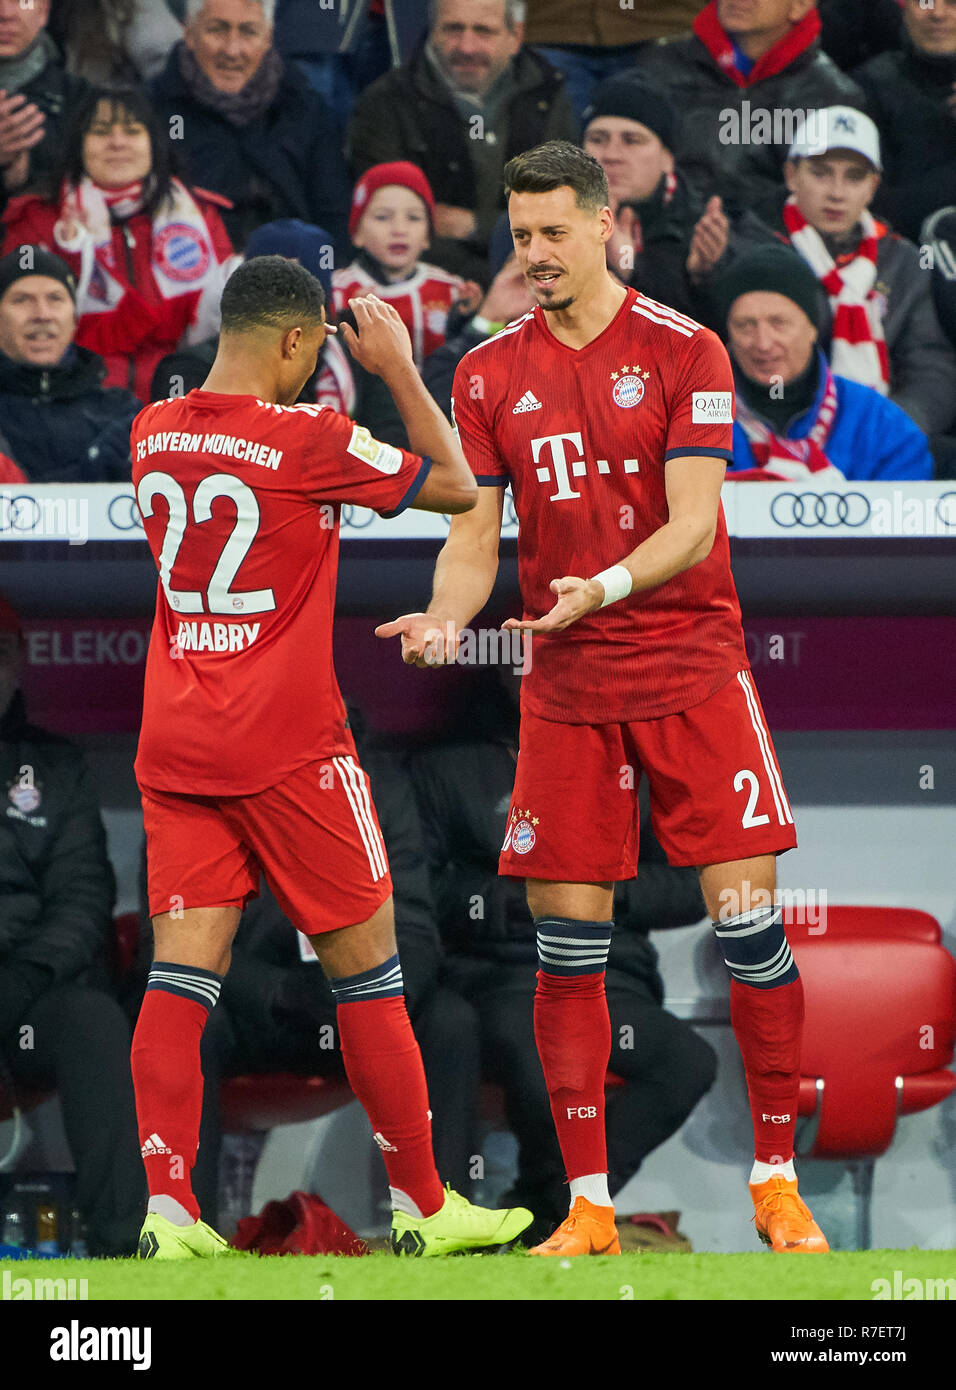 Munich, Germany. 8th December 2018. Serge GNABRY, FCB 22 Sandro WAGNER, FCB 2  change, substitution,  FC BAYERN MUNICH - 1.FC NUREMBERG 3-0  - DFL REGULATIONS PROHIBIT ANY USE OF PHOTOGRAPHS as IMAGE SEQUENCES and/or QUASI-VIDEO -  1.German Soccer League , Munich, December 08, 2018  Season 2018/2019, matchday 14, FCB, 1.FC Nürnberg © Peter Schatz / Alamy Live News Stock Photo